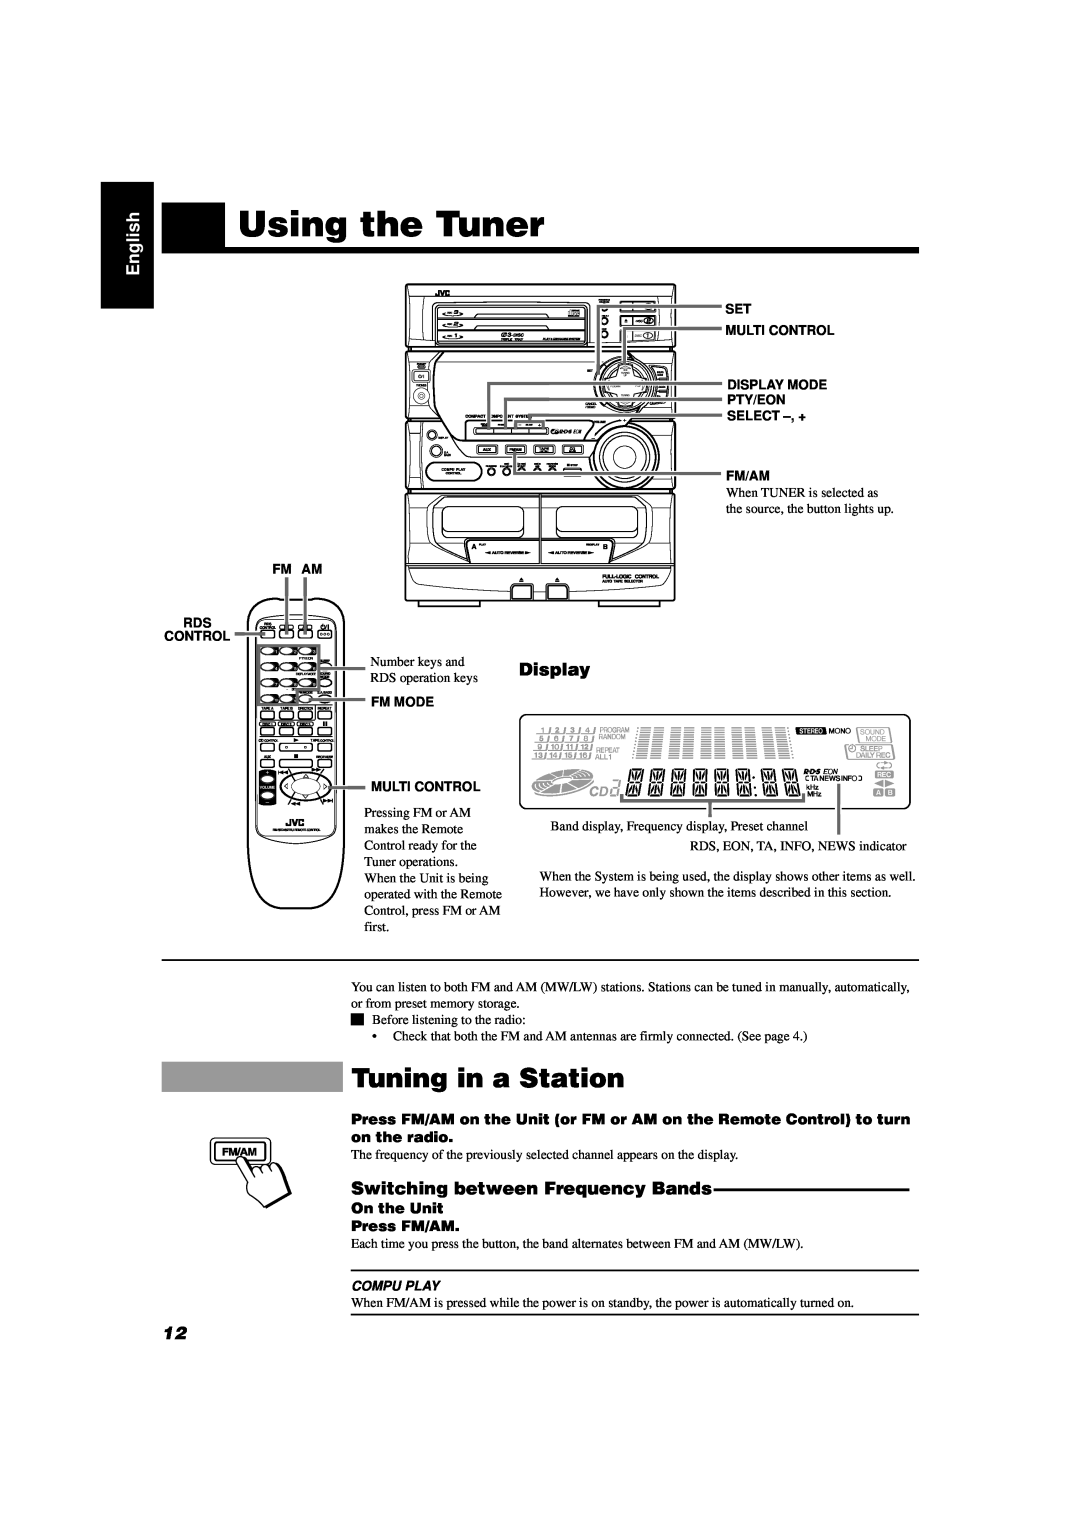 JVC CA-D432TR manual Using the Tuner, Tuning in a Station, Switching between Frequency Bands, English, Display, Compu Play 